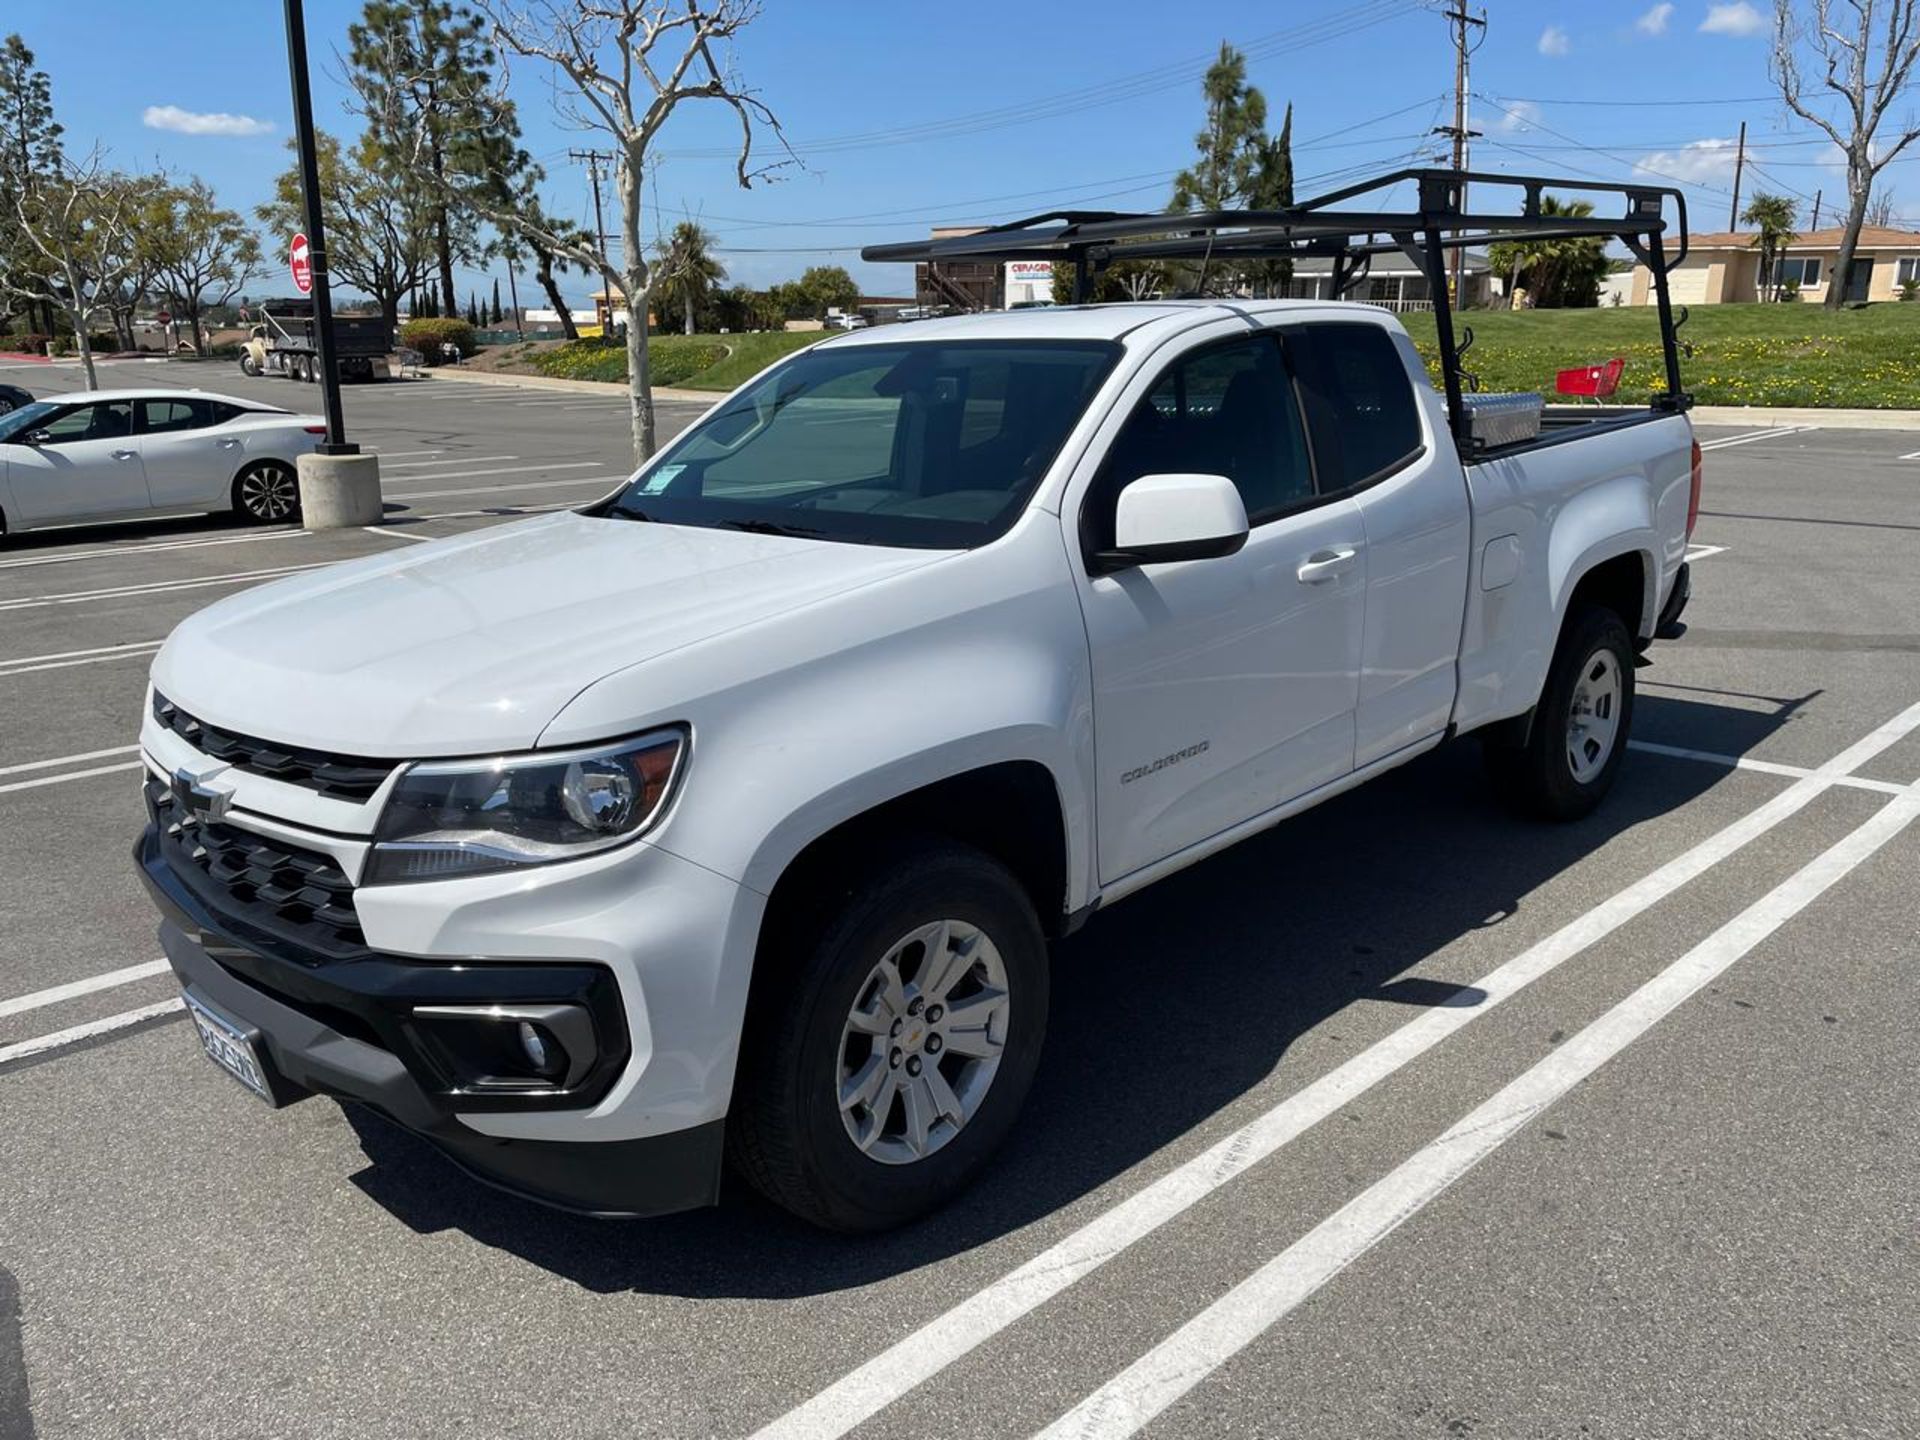 2022 Chevrolet Colorado LT Extended Cab 4x2 Pickup Truck